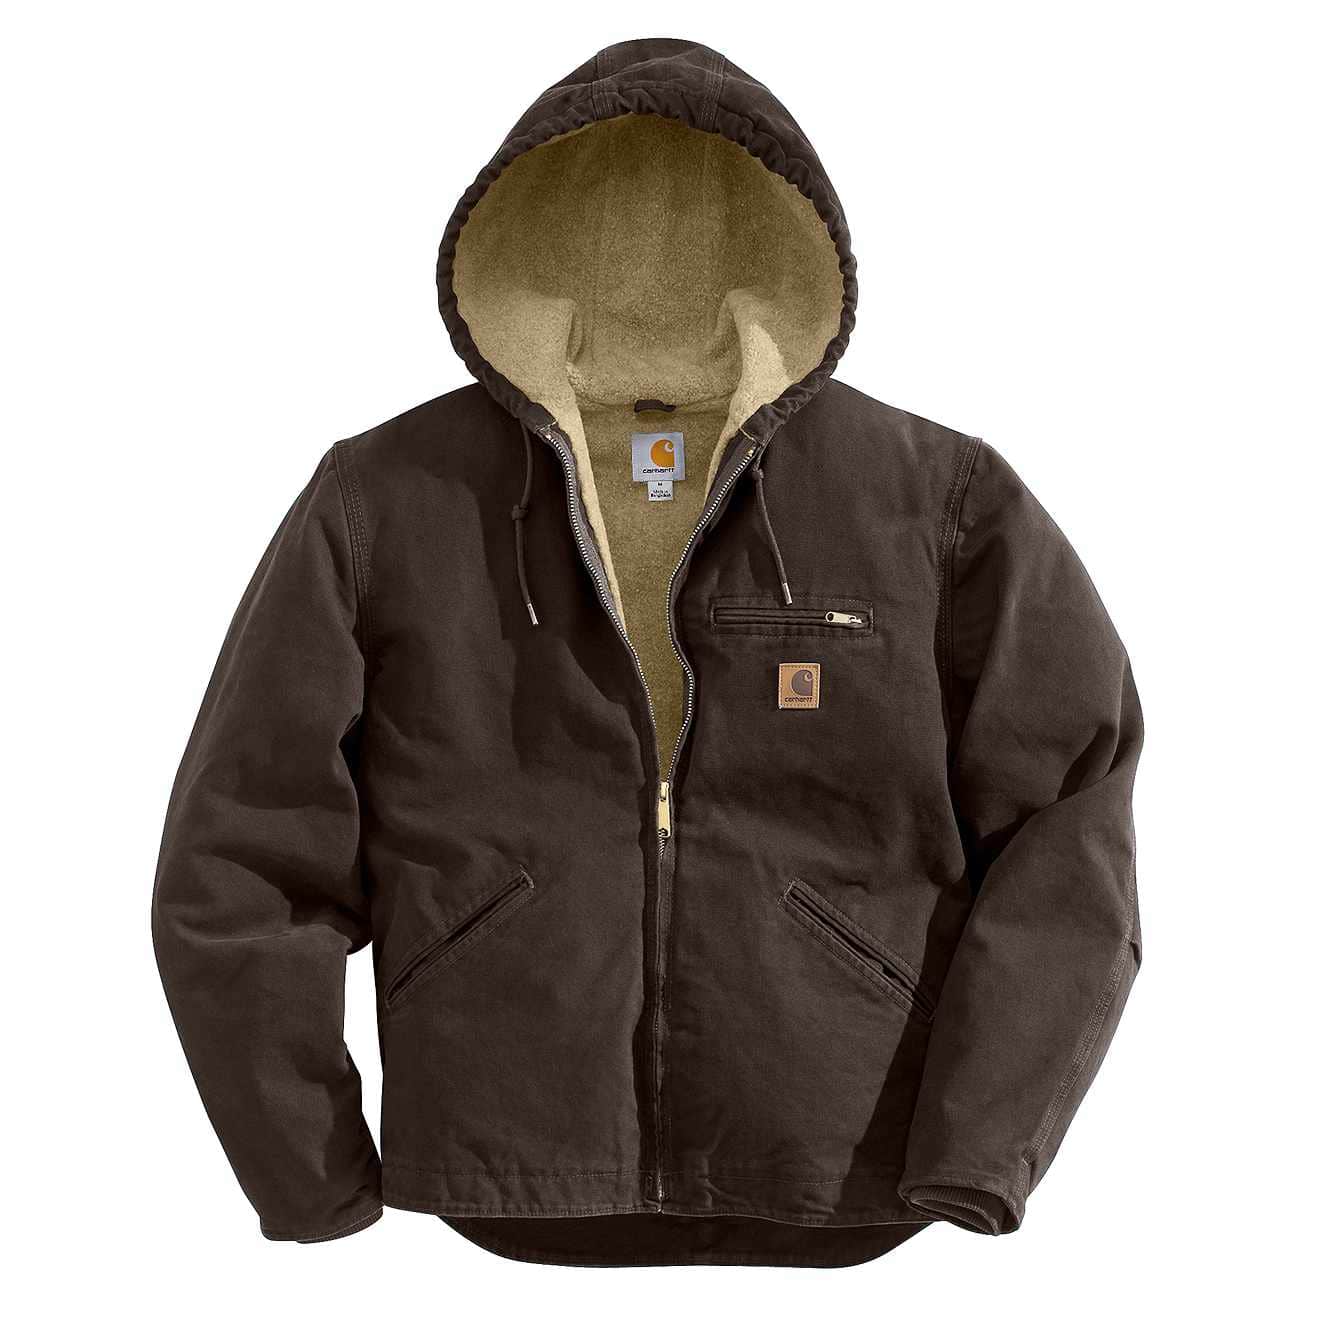 Recommend me a jacket... J141DKB?$pdp-primary-image-static$ 